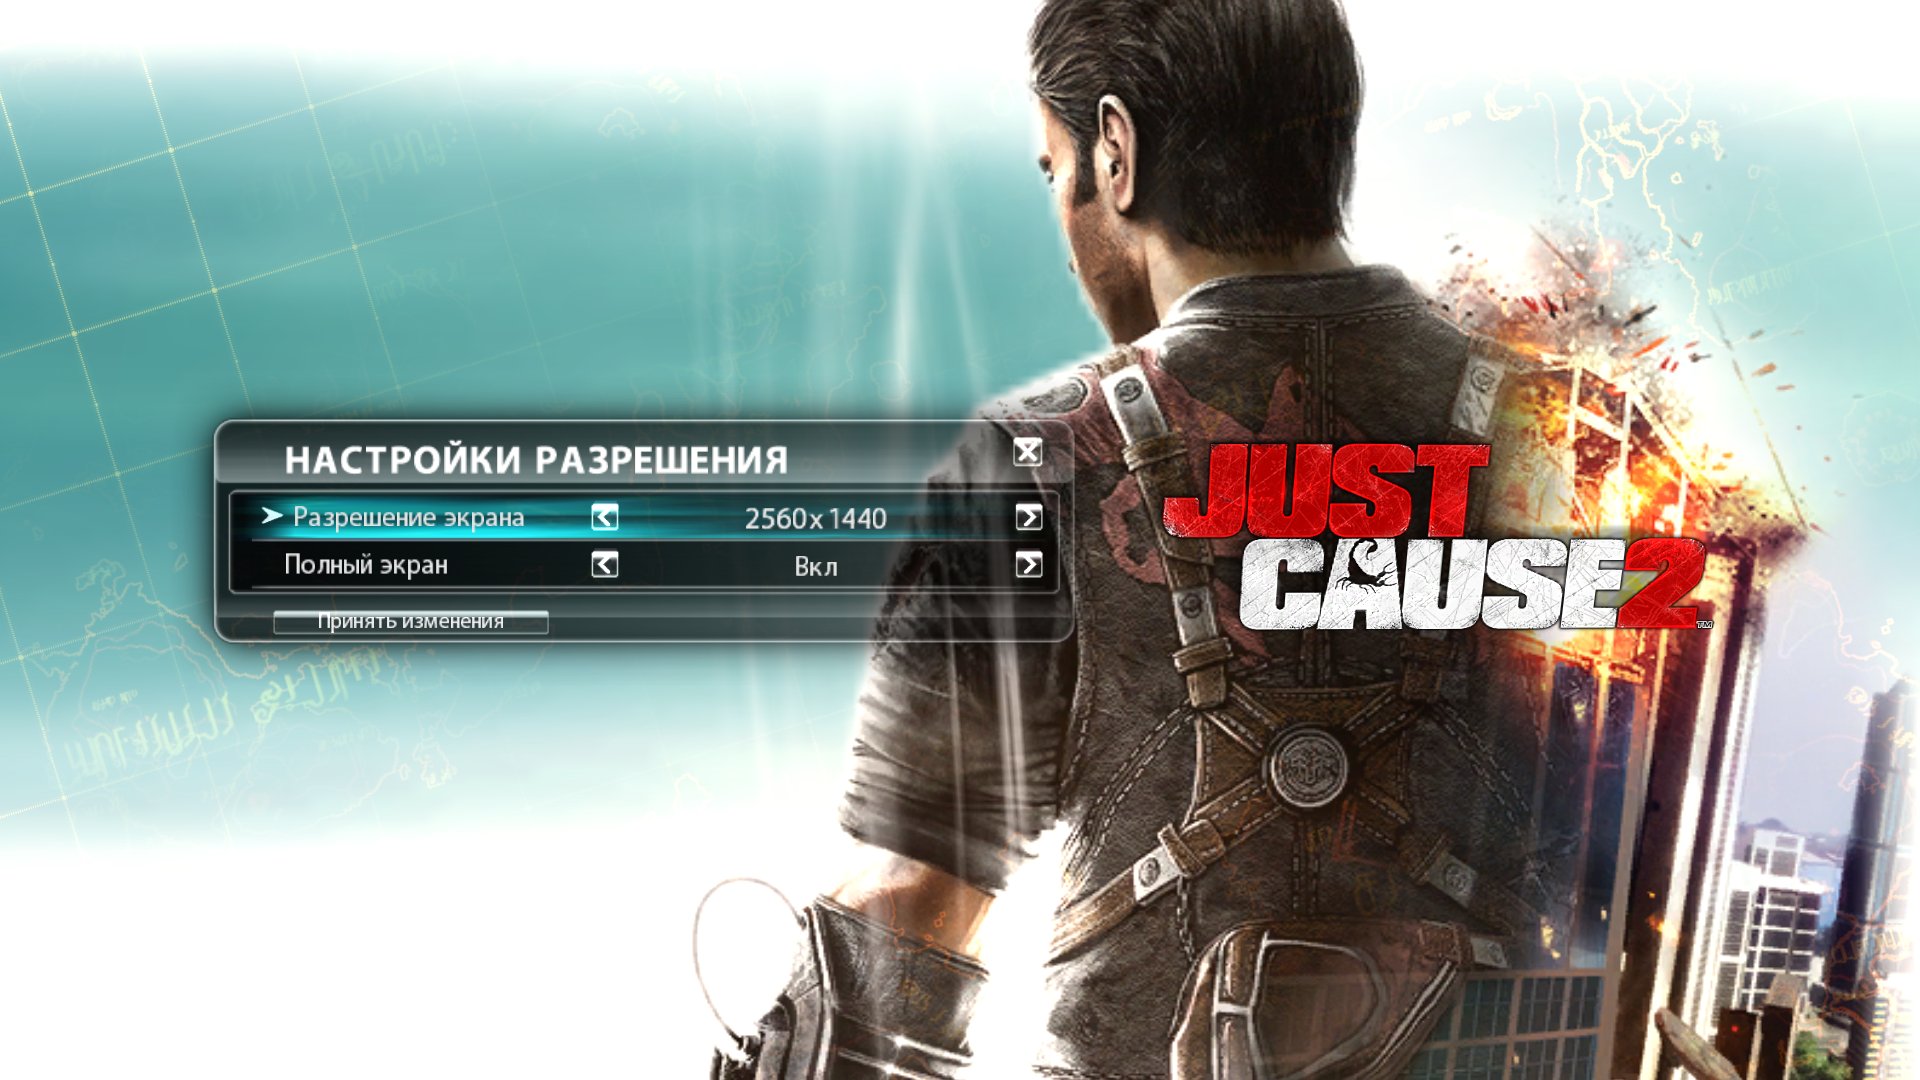 Is it just a game. Just cause 2 Xbox 360 диск. Just cause 1 диск. Just cause 2 диск. Разрешение экрана в играх.